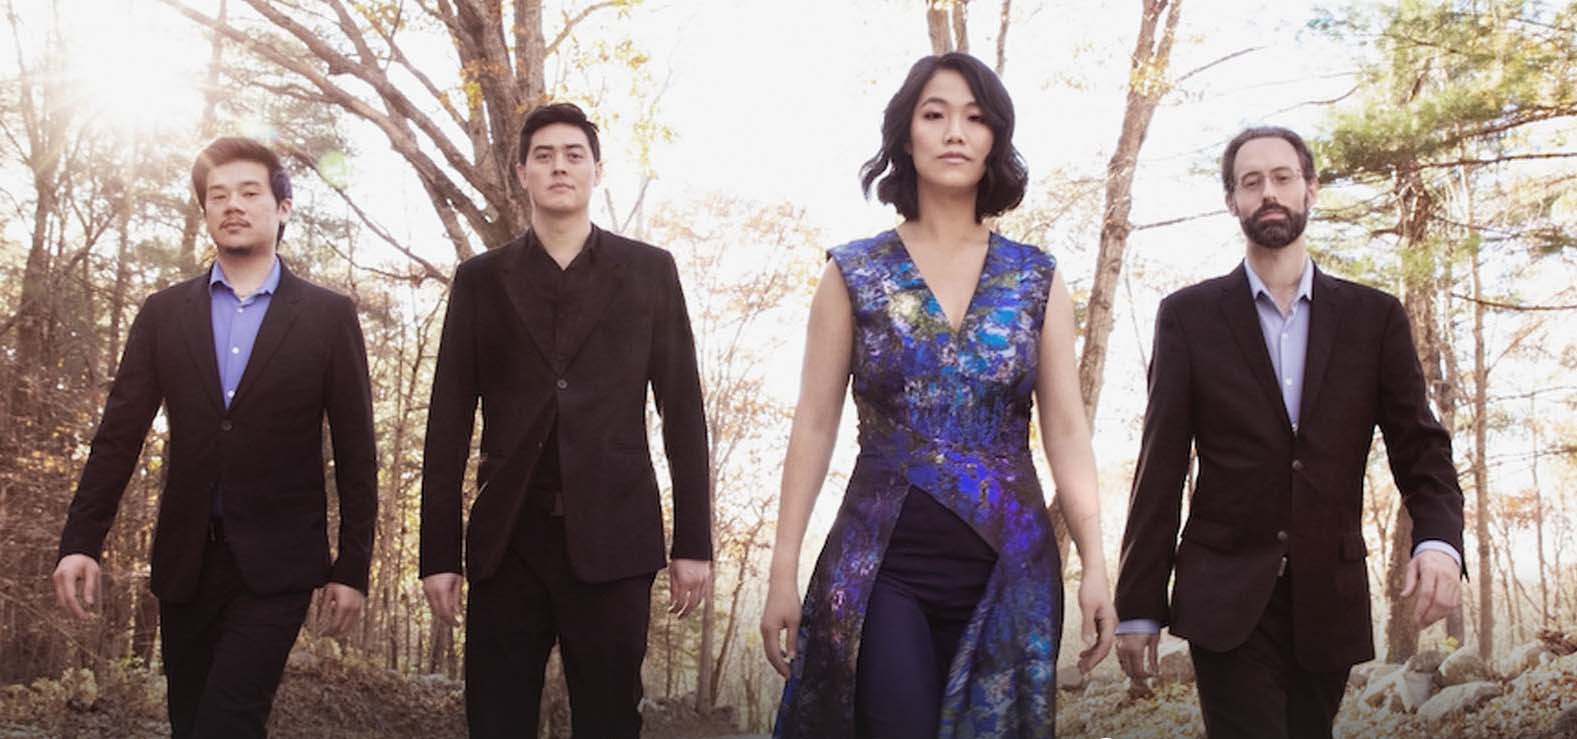 A classical quartet group posing in a forest.